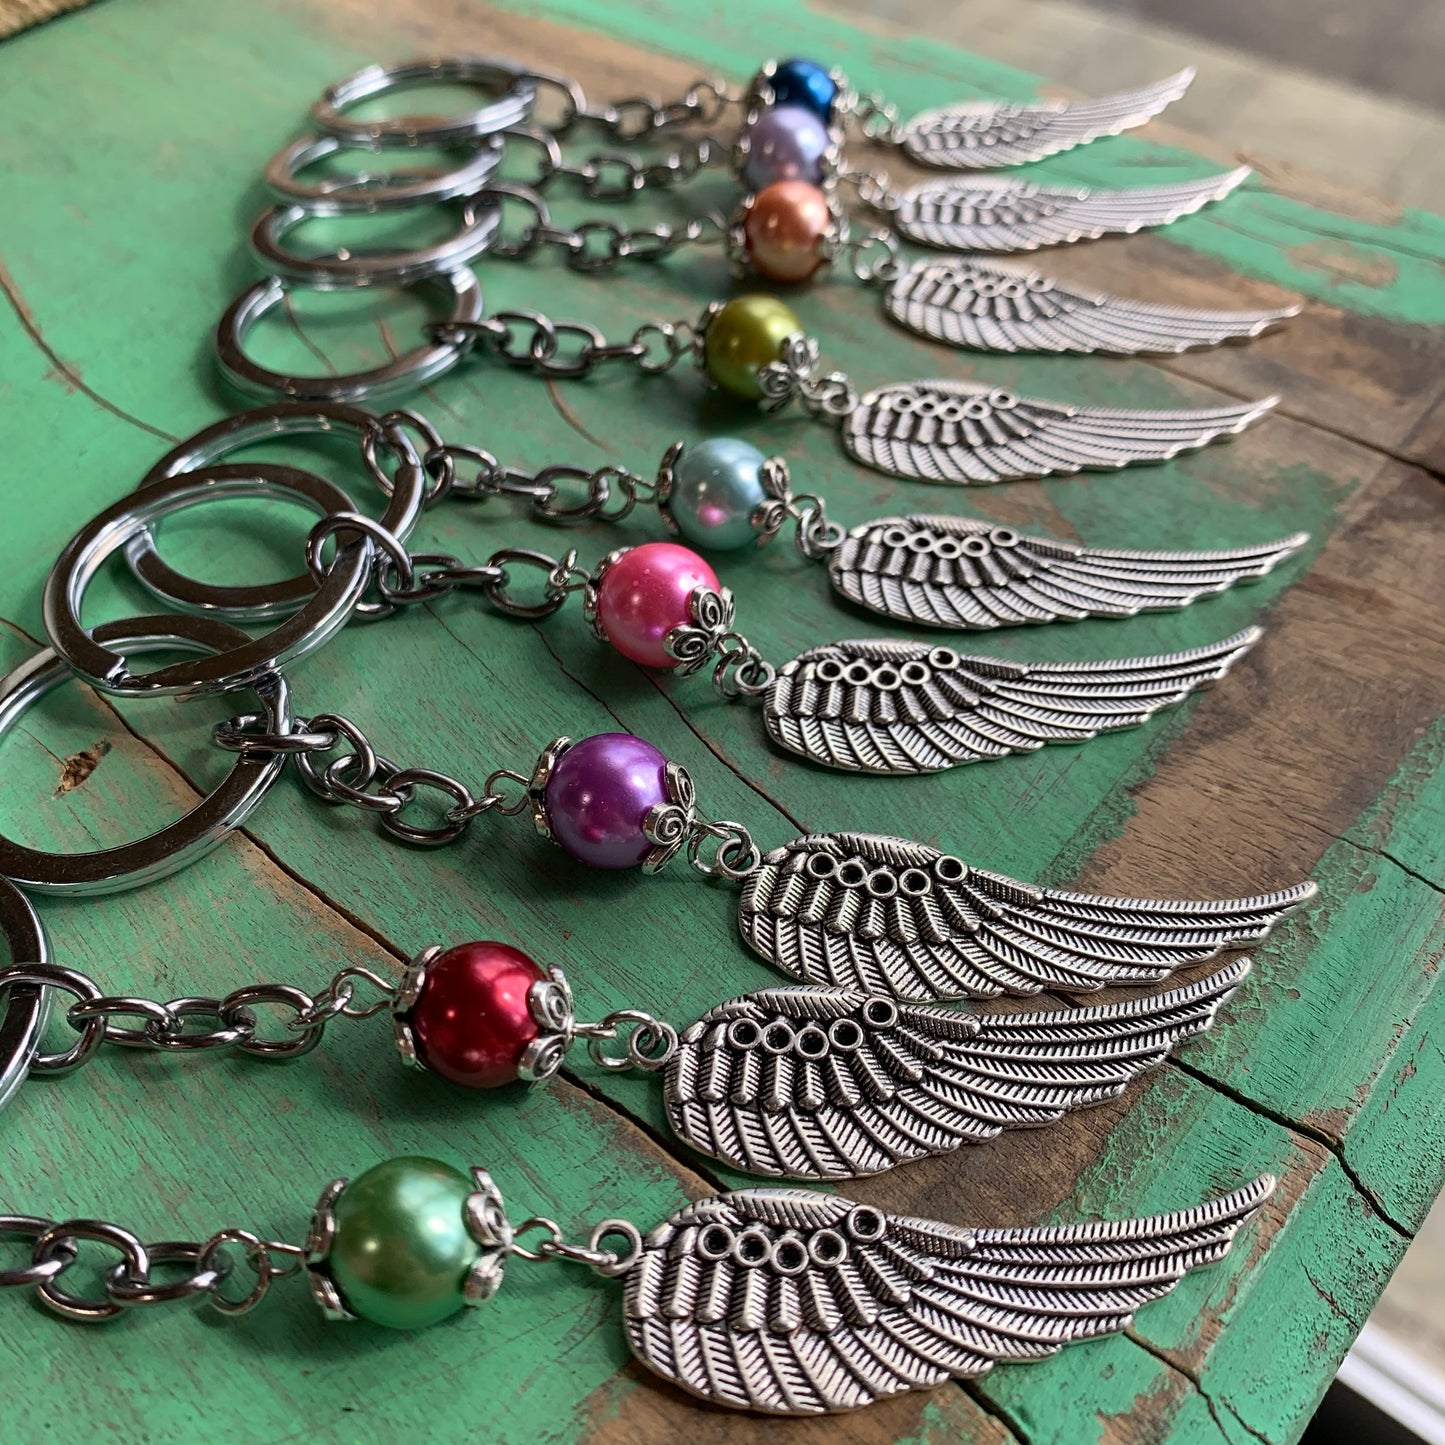 Angel Wing Keychains